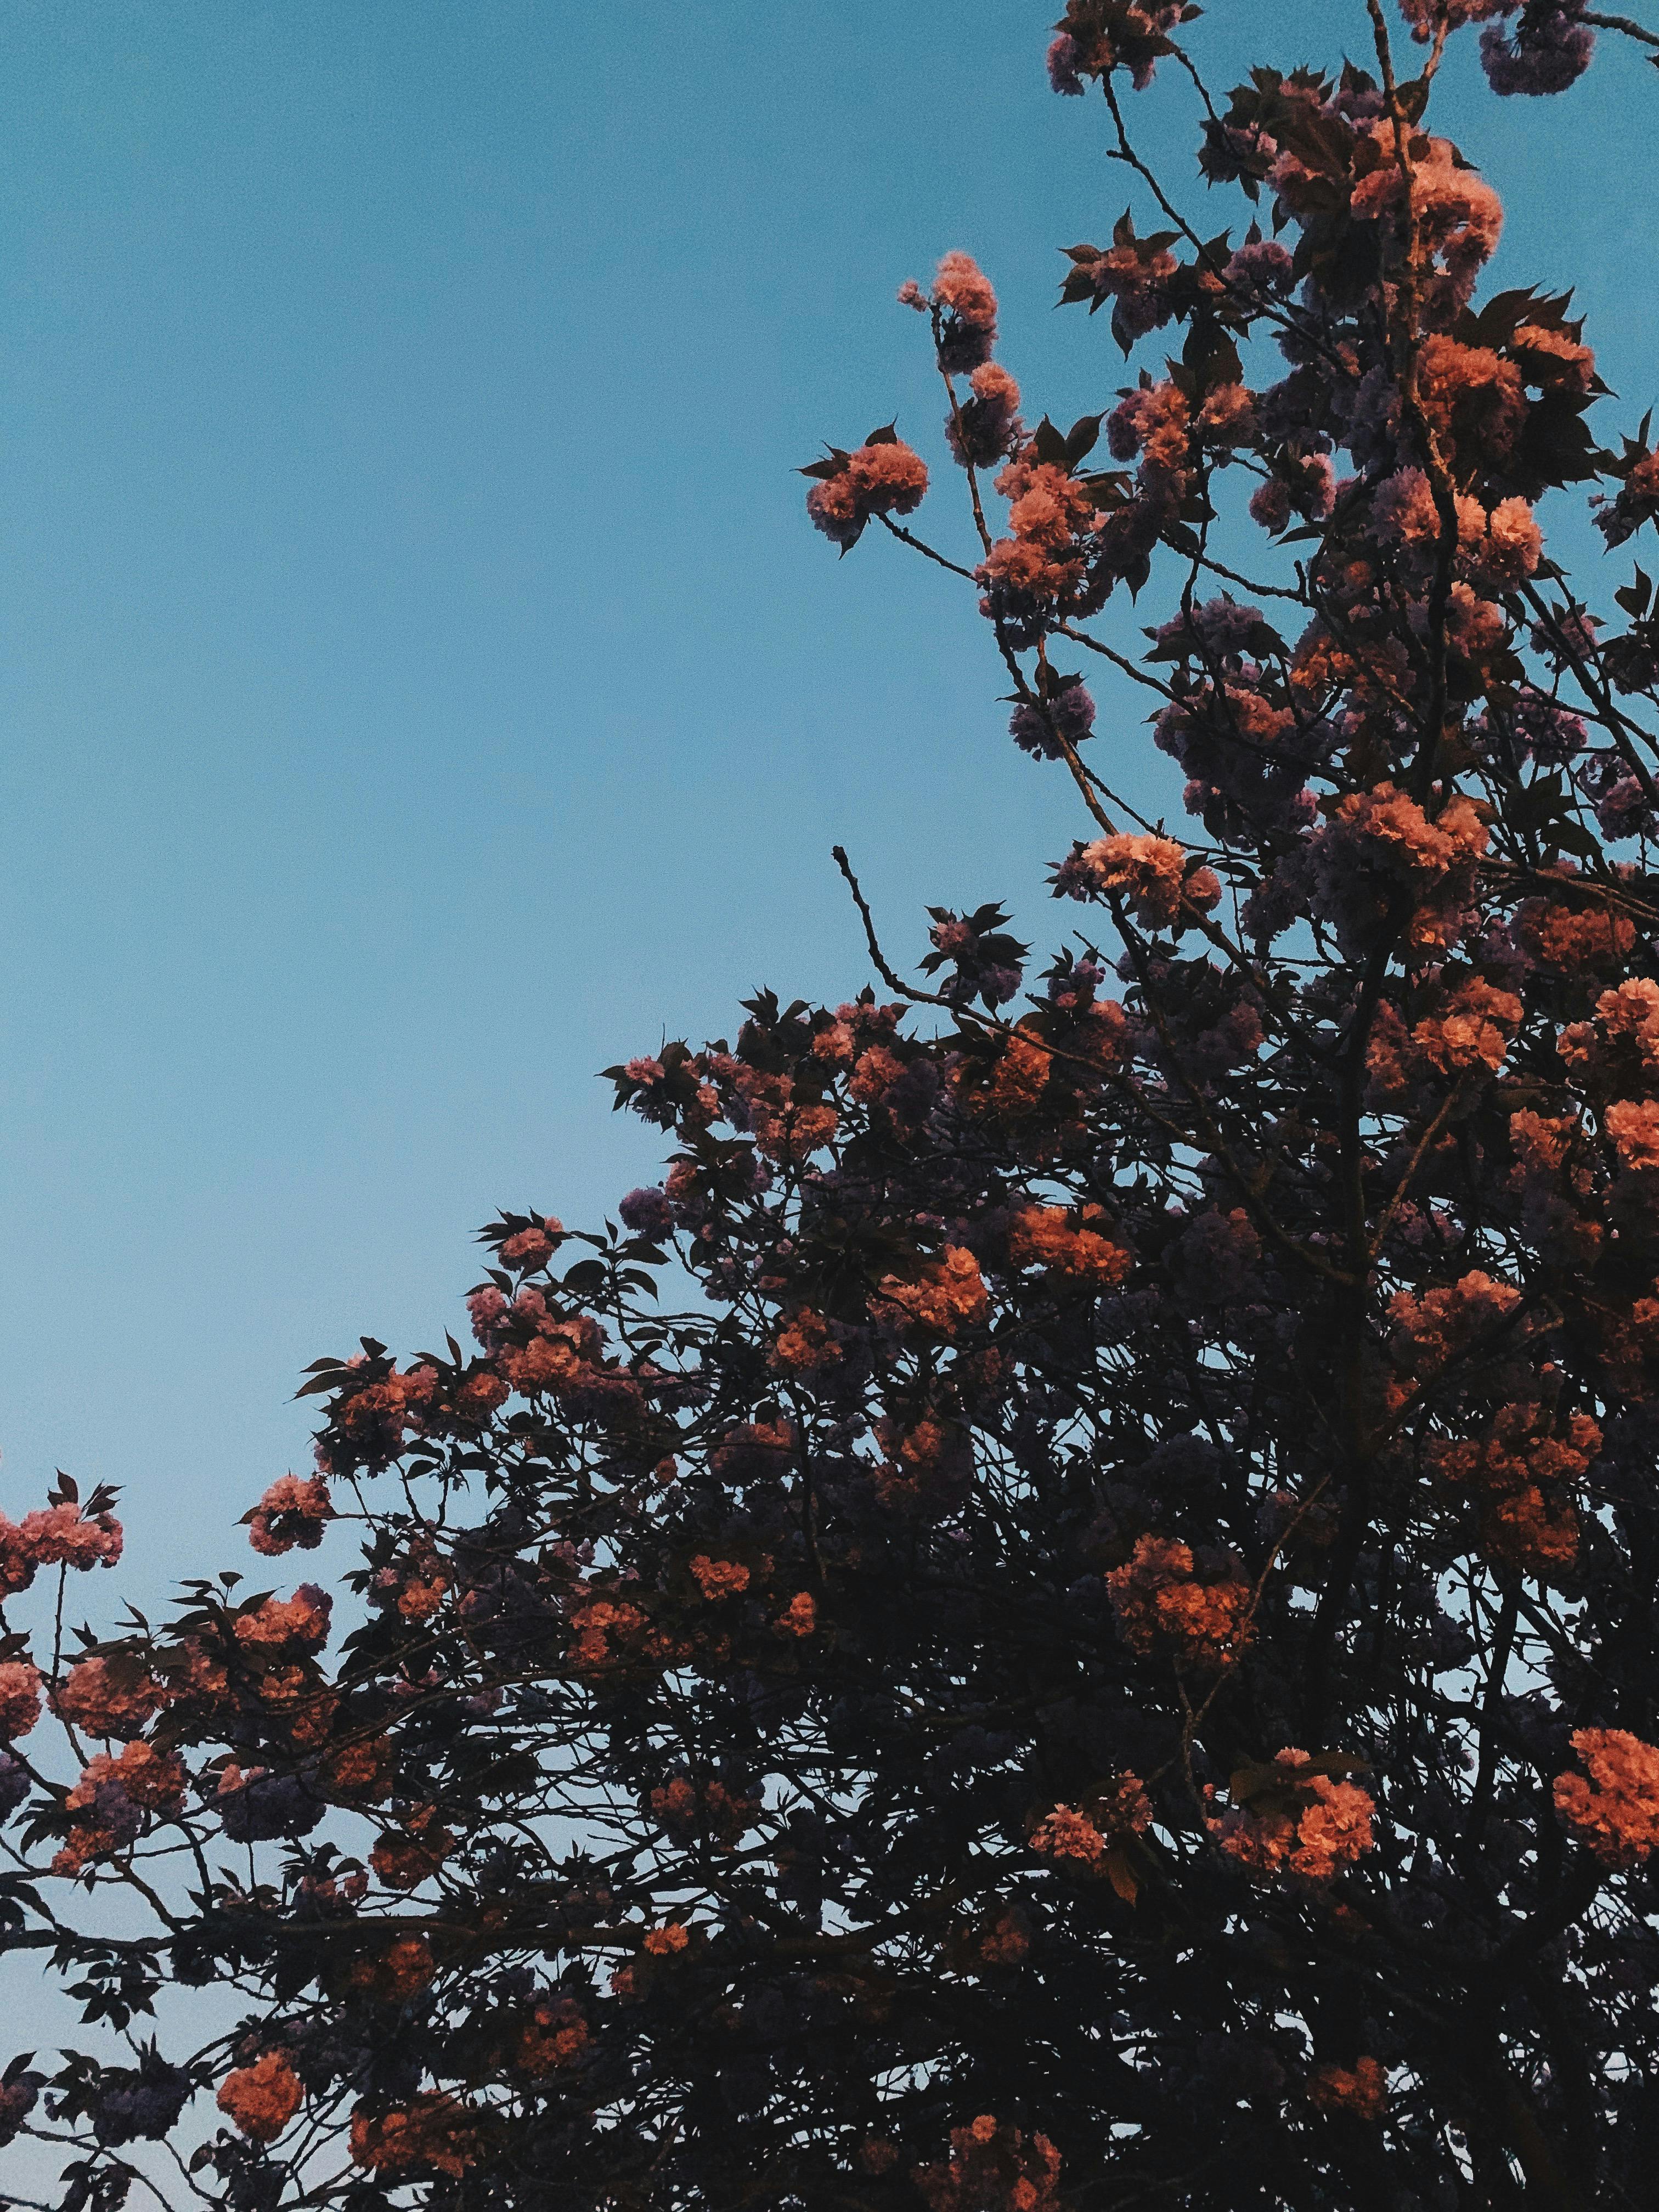 Delicate cherry blossoms on twigs under blue sky · Free Stock Photo